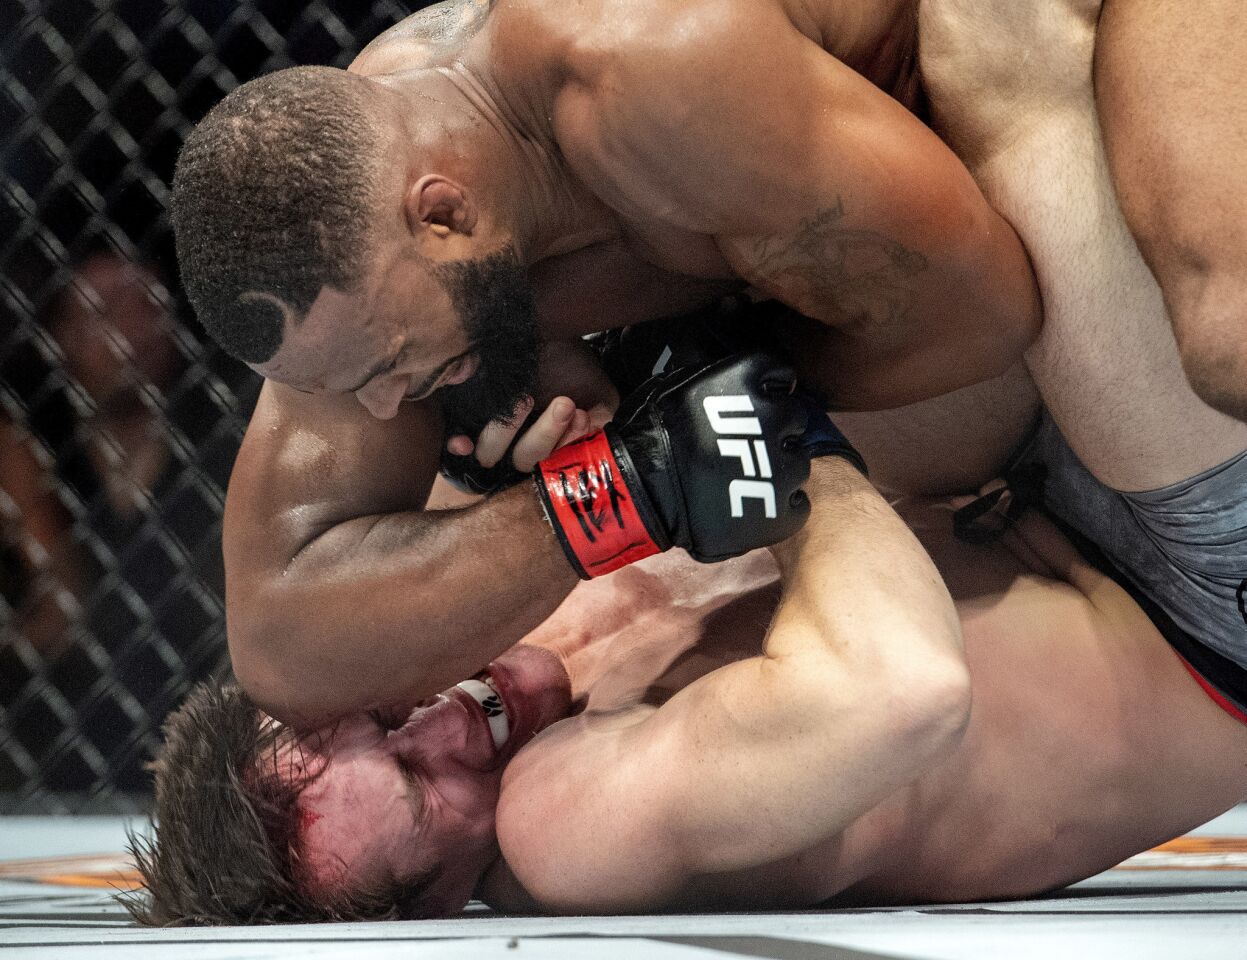 Tyron Woodley, top, elbows Darren Till in the face during their welterweight title mixed martial arts bout at UFC 228 on Saturday, Sept. 8, 2018, in Dallas. Woodley won by submission. (AP Photo/Jeffrey McWhorter)